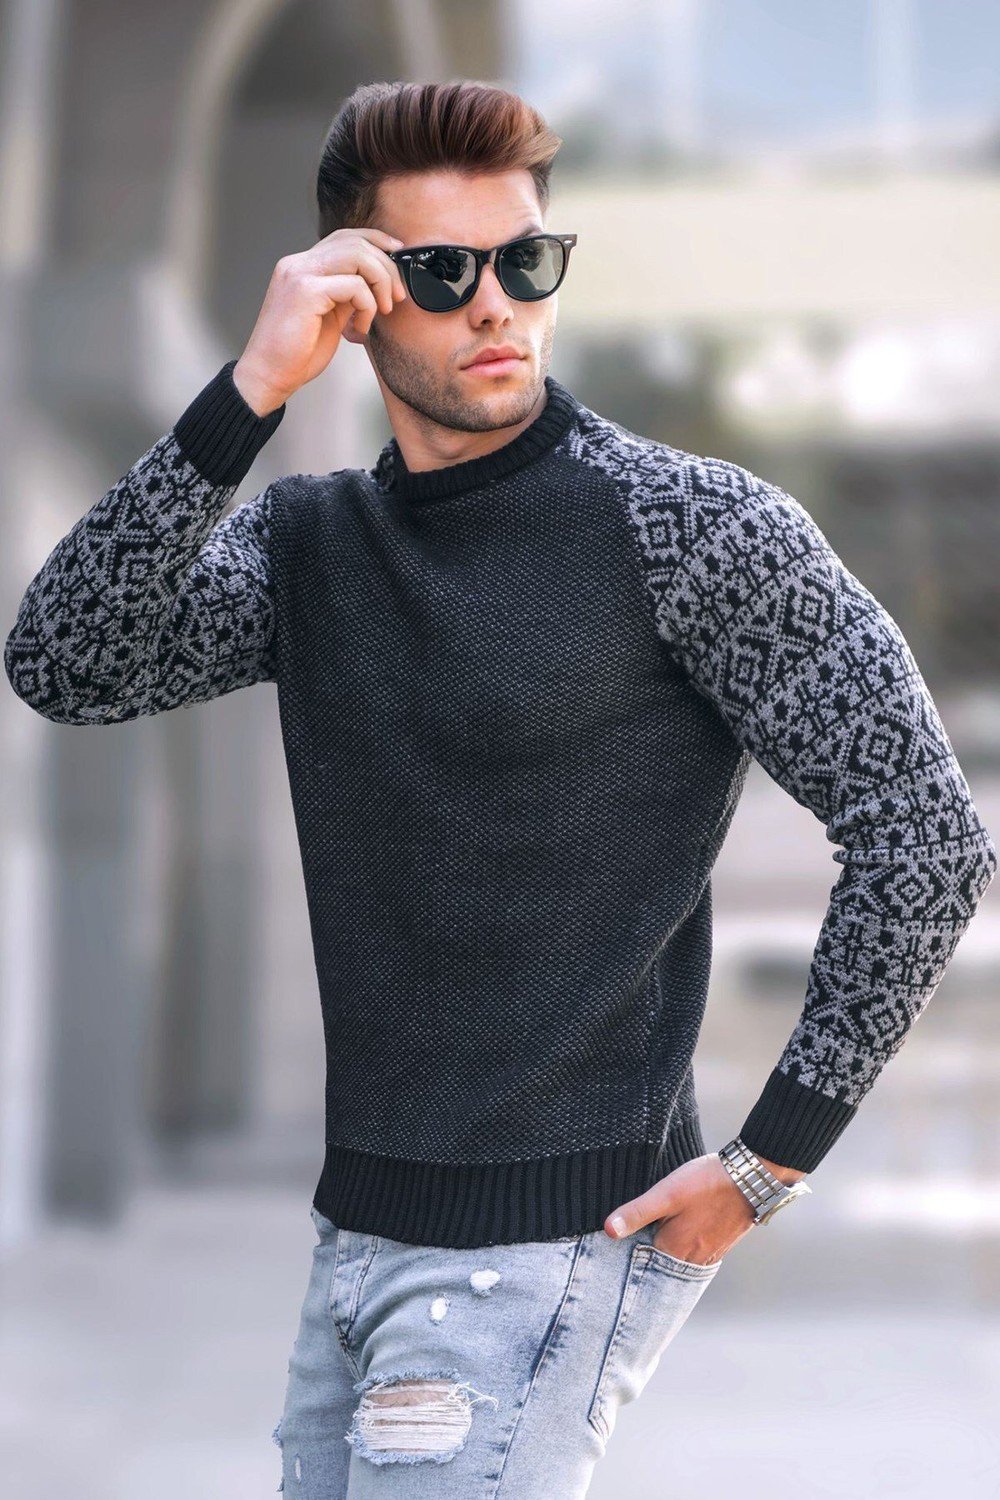 Madmext Black Jacquard Patterned Crew Neck Knitwear Sweater 5770